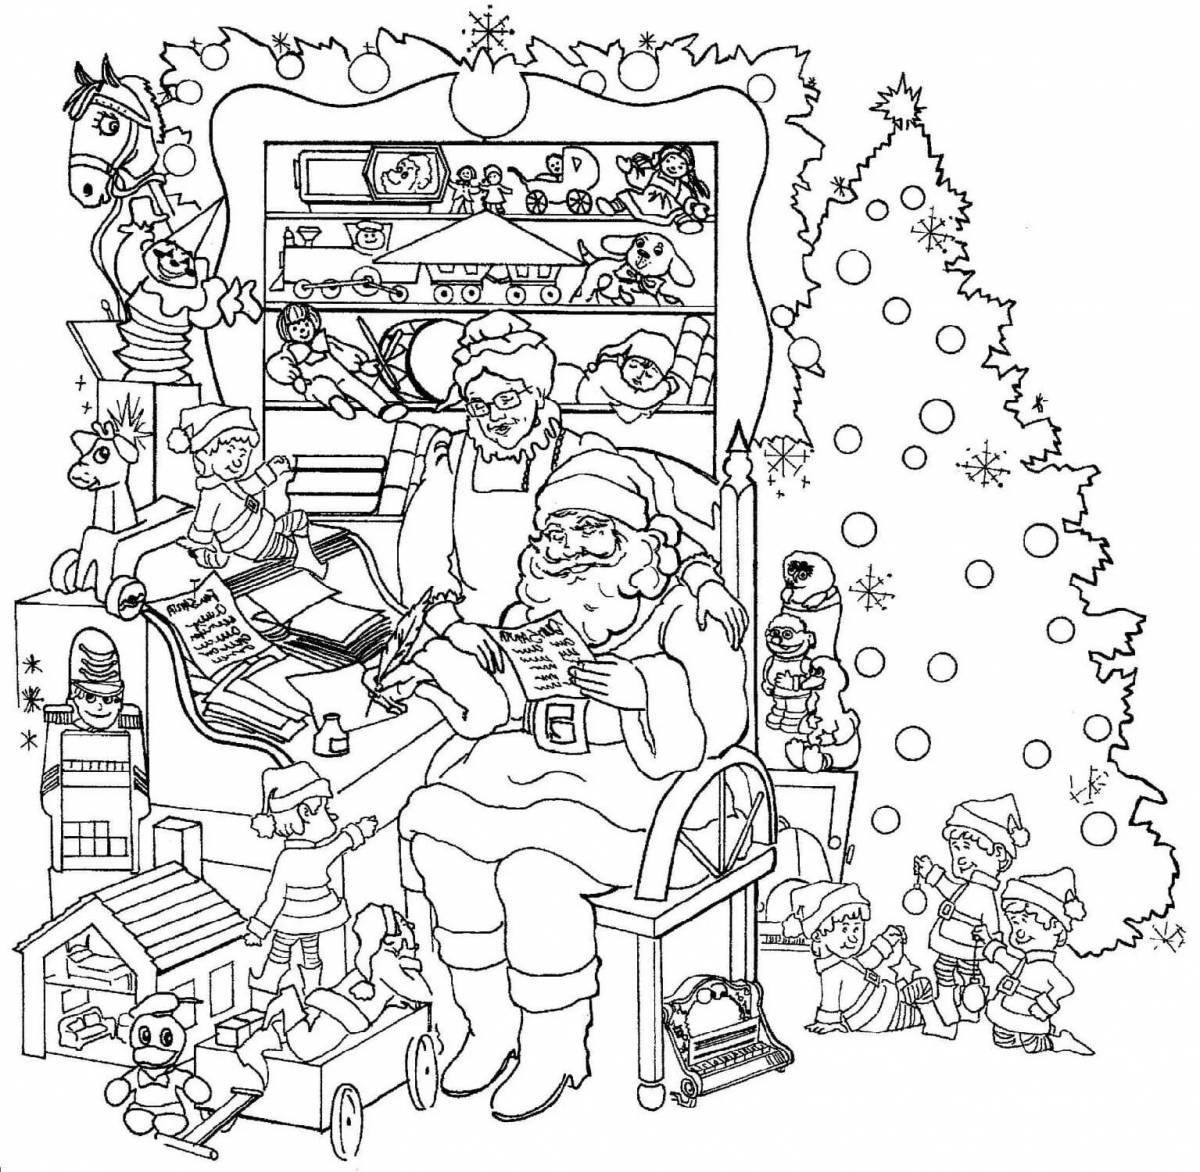 Generous Christmas coloring book for adults